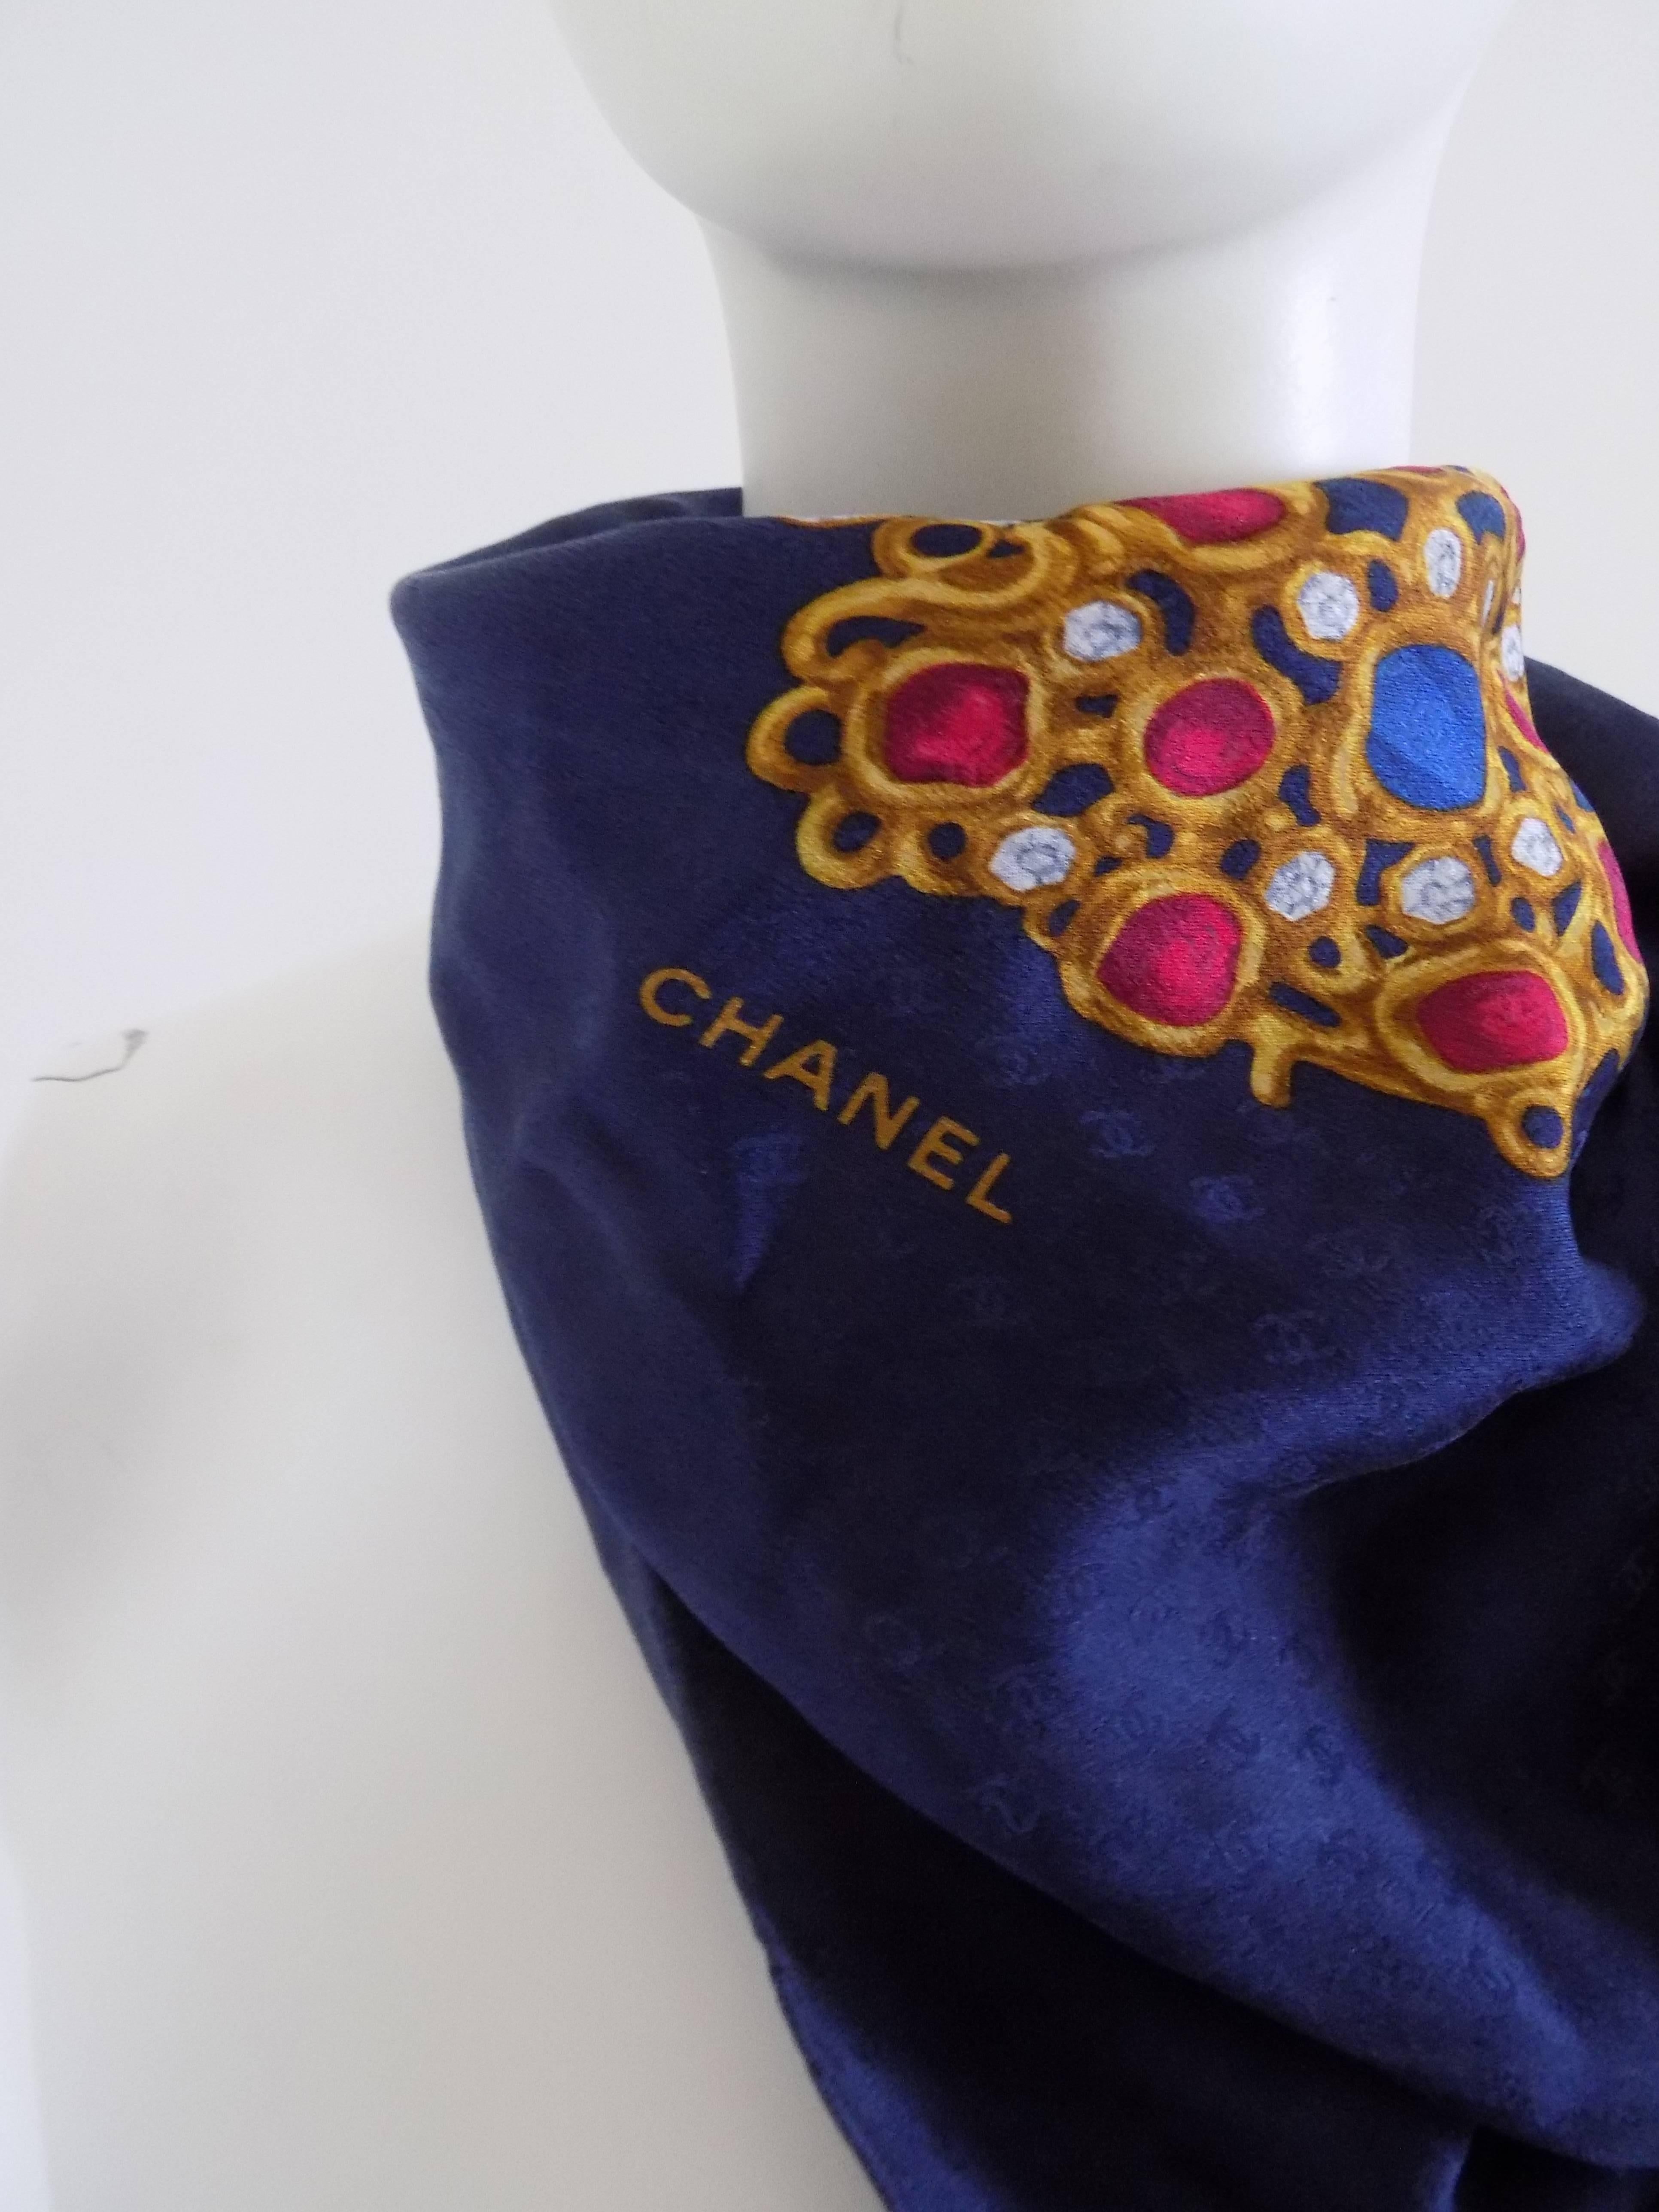 1990s Chanel Multicolour Jewel Foulard Scarf
Made in France